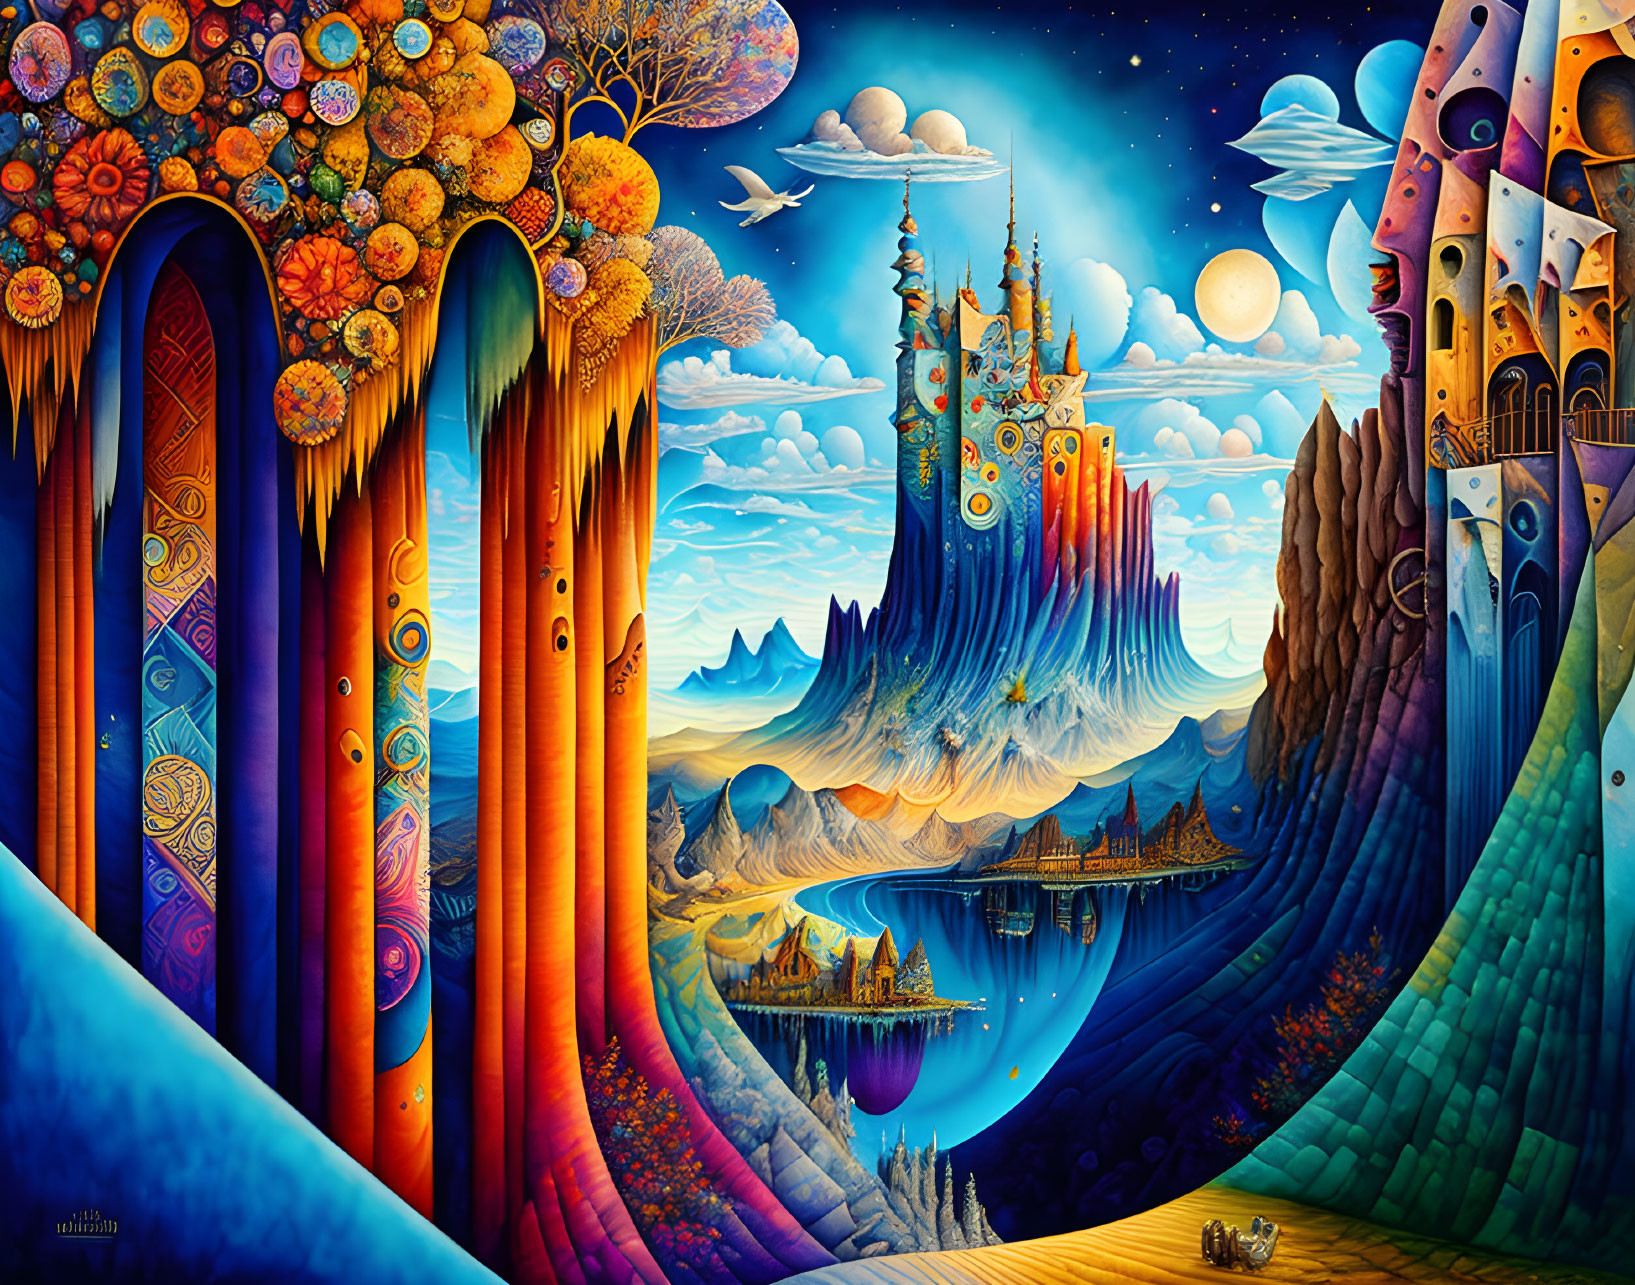 Colorful Whimsical Landscape with Surreal Elements